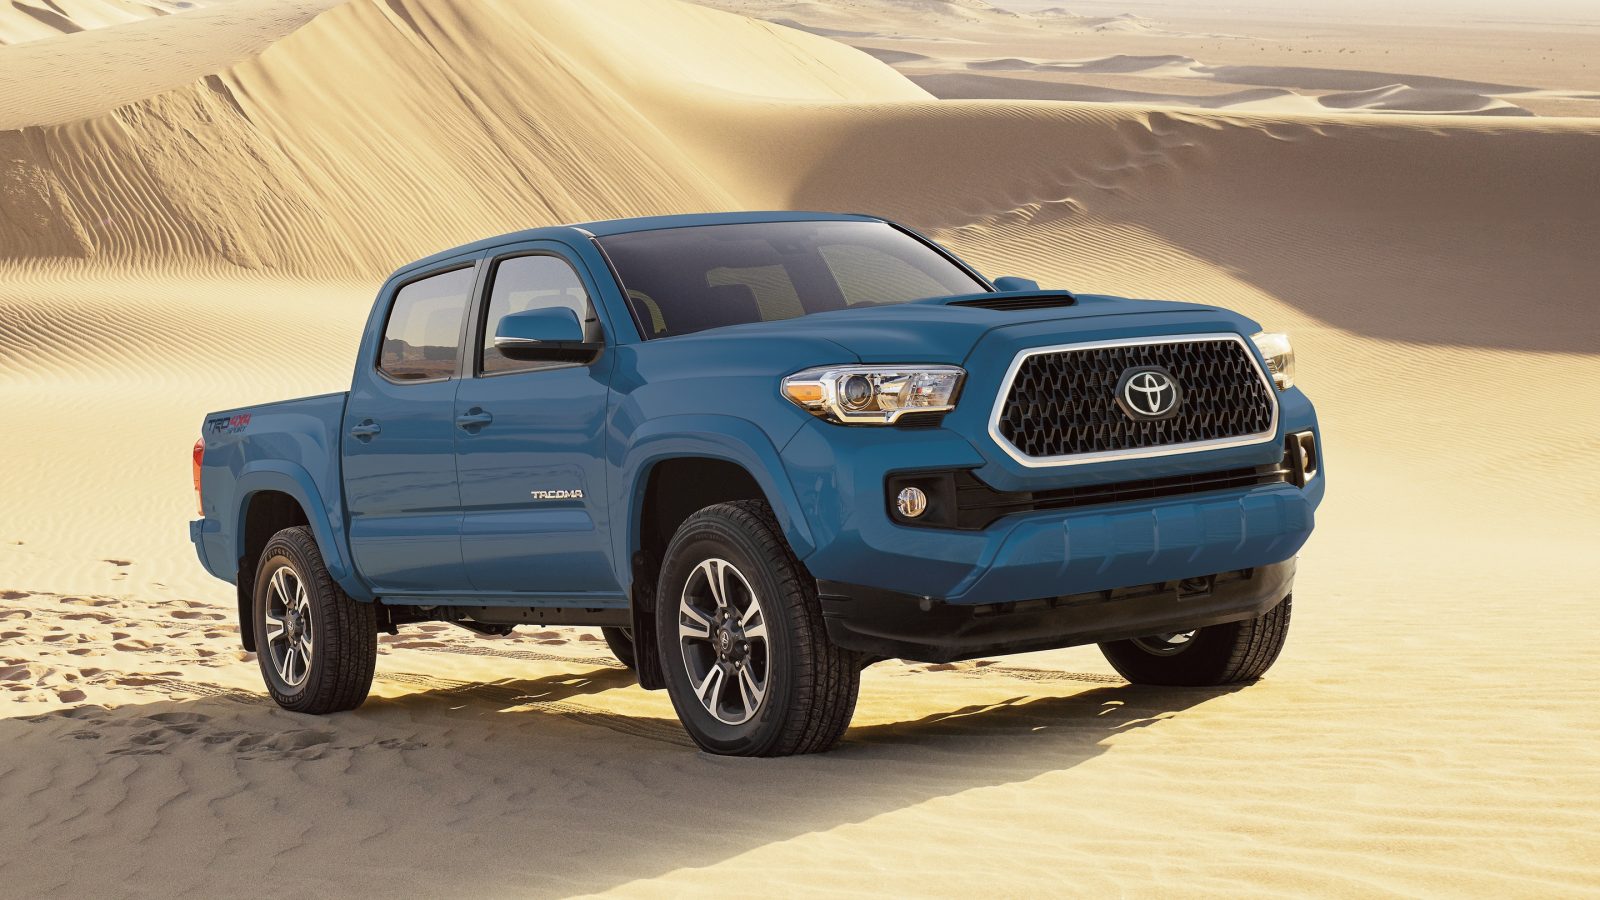 2019 Toyota Tacoma TRD Sport 4x4 Review: Still A Rugged Truck, But How